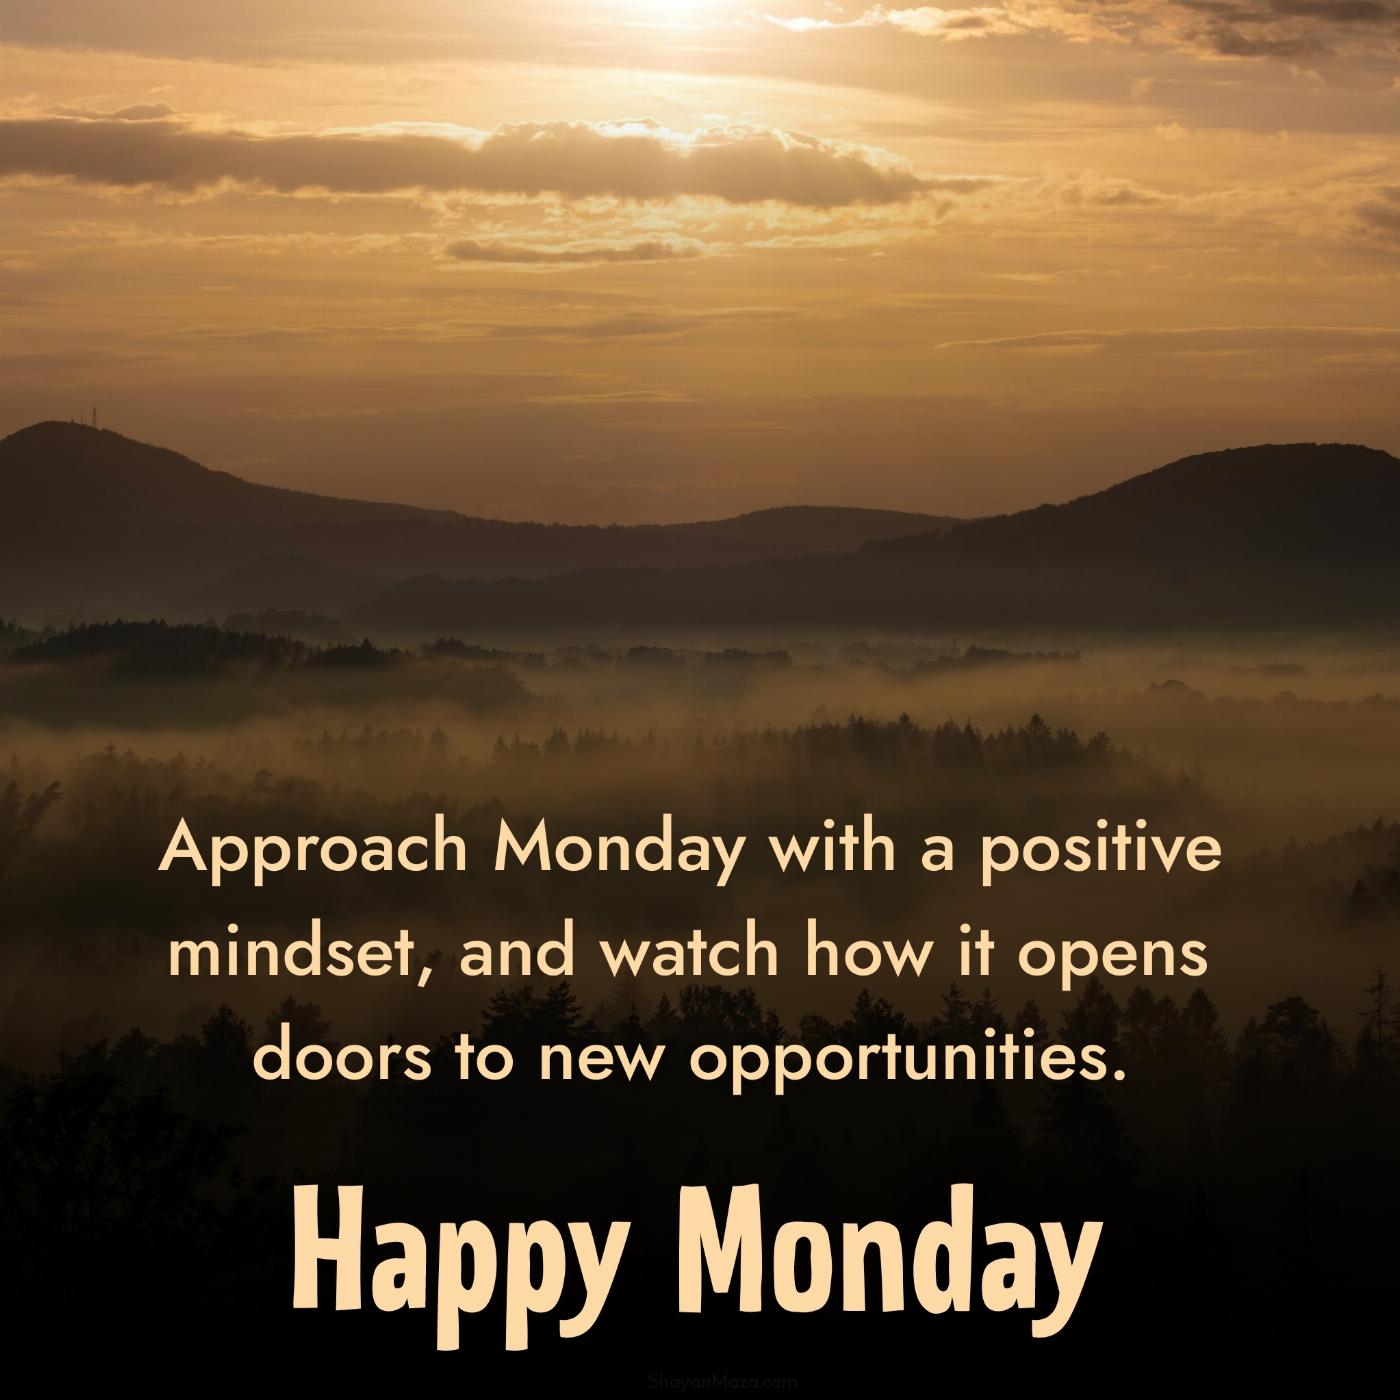 Approach Monday with a positive mindset and watch how